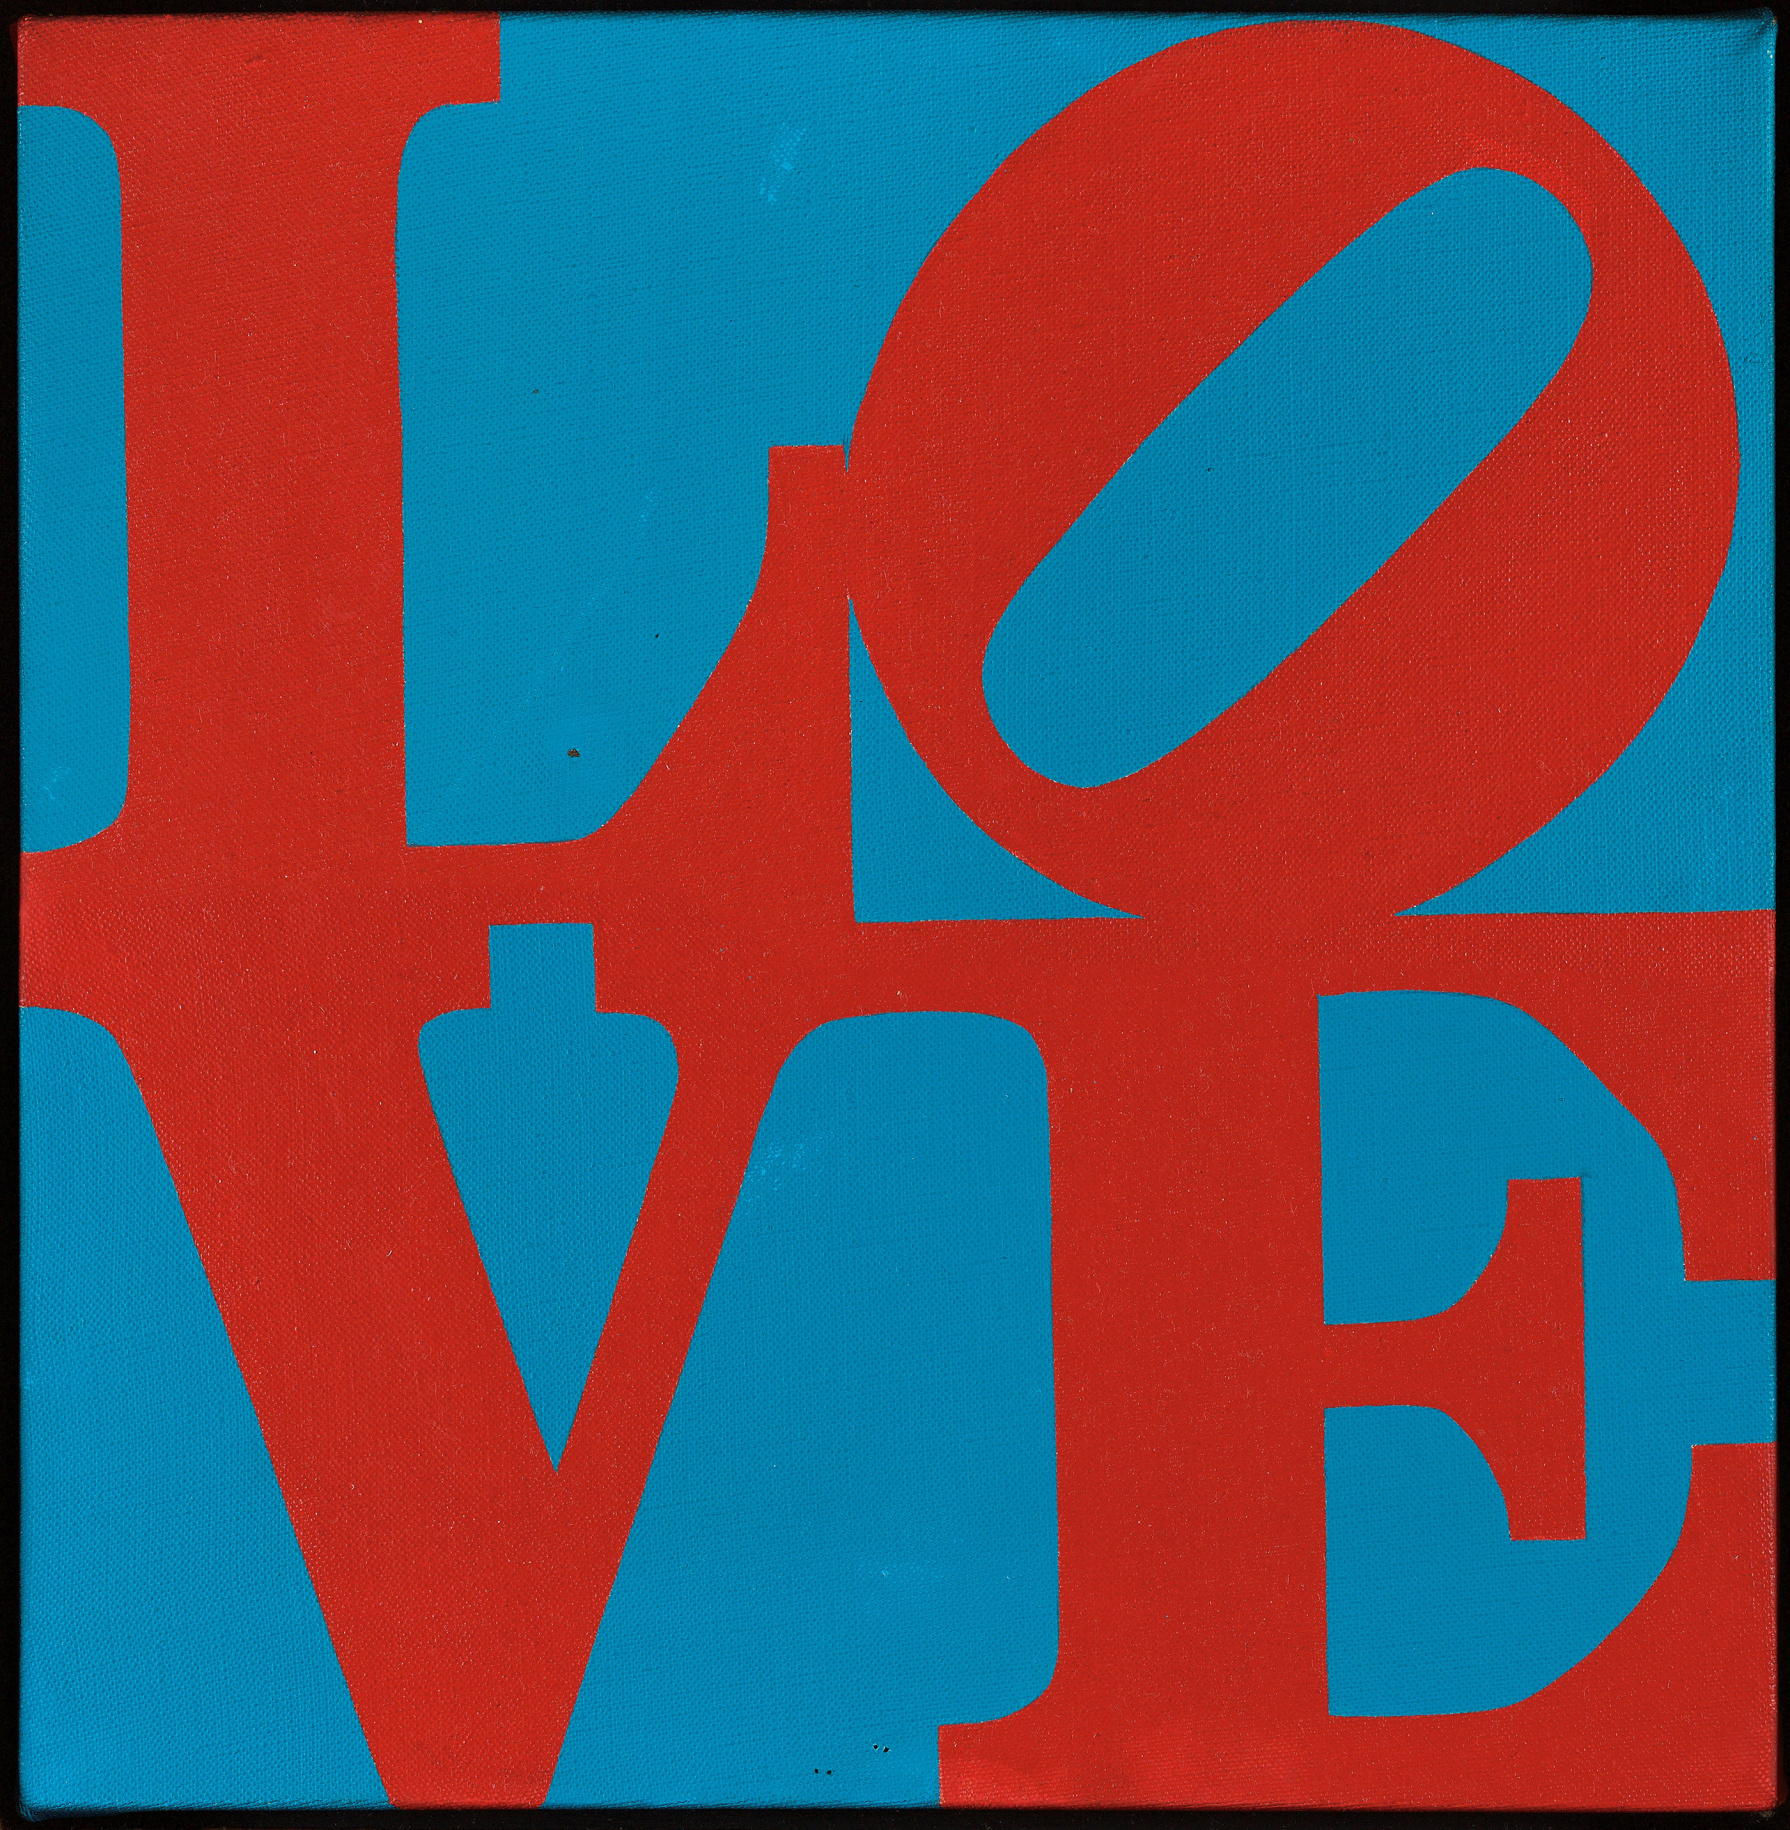 LOVE is a 12 inch square painting with the red letters L and a tilted O stacked above the letters V and E, against a blue background.